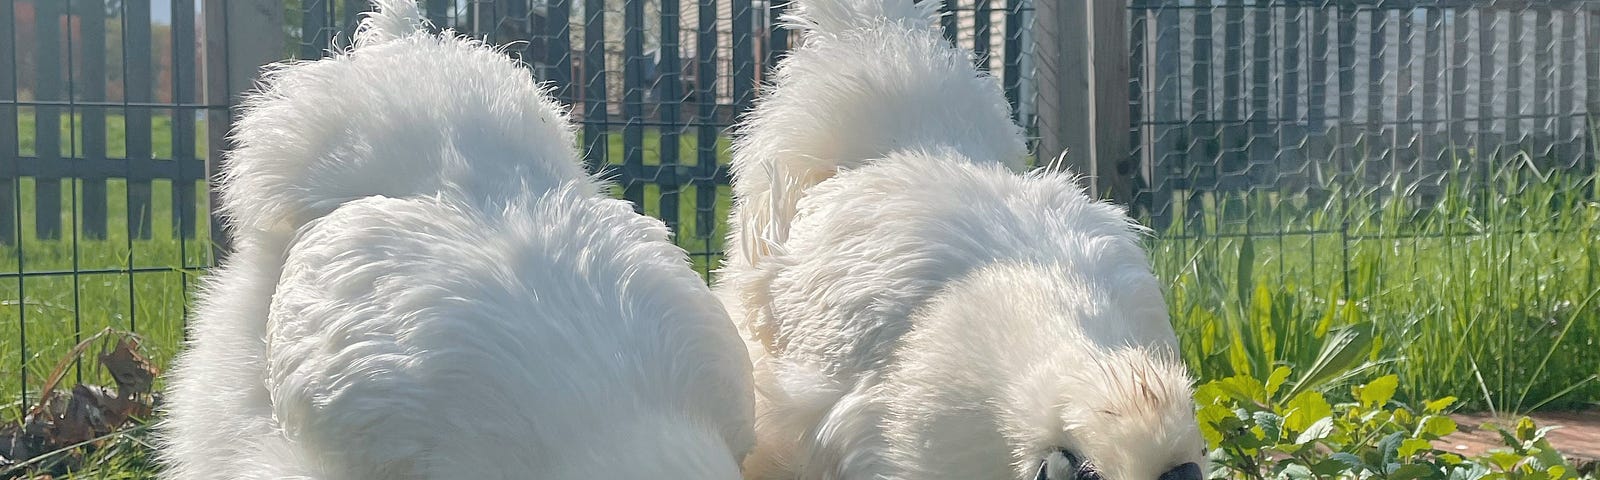 Two white silky hens peck at a patch of green grass — picket fence in the background.